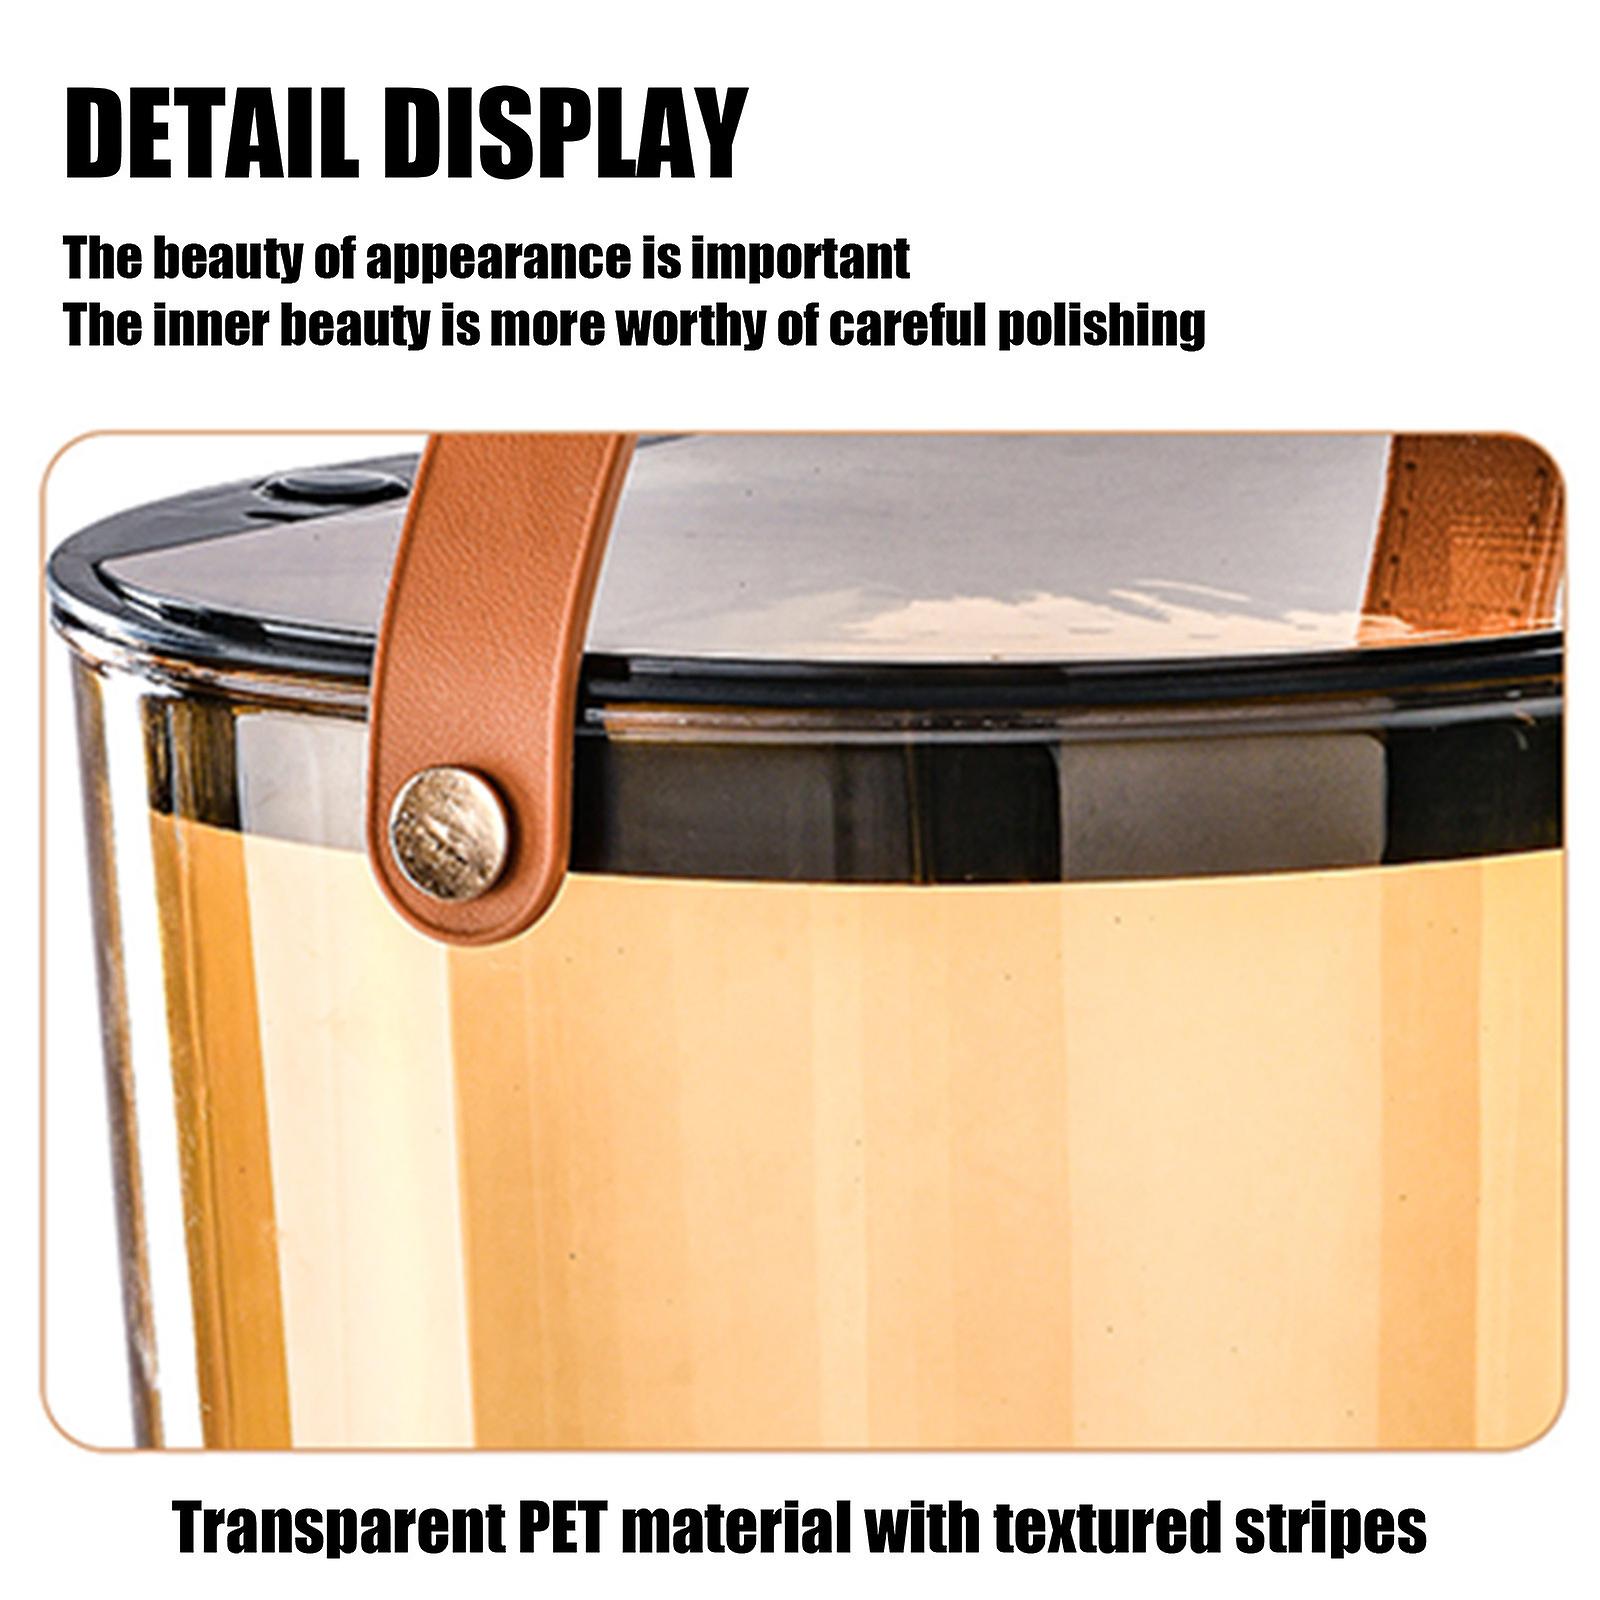 Clear plastic trash cans with flip top lid